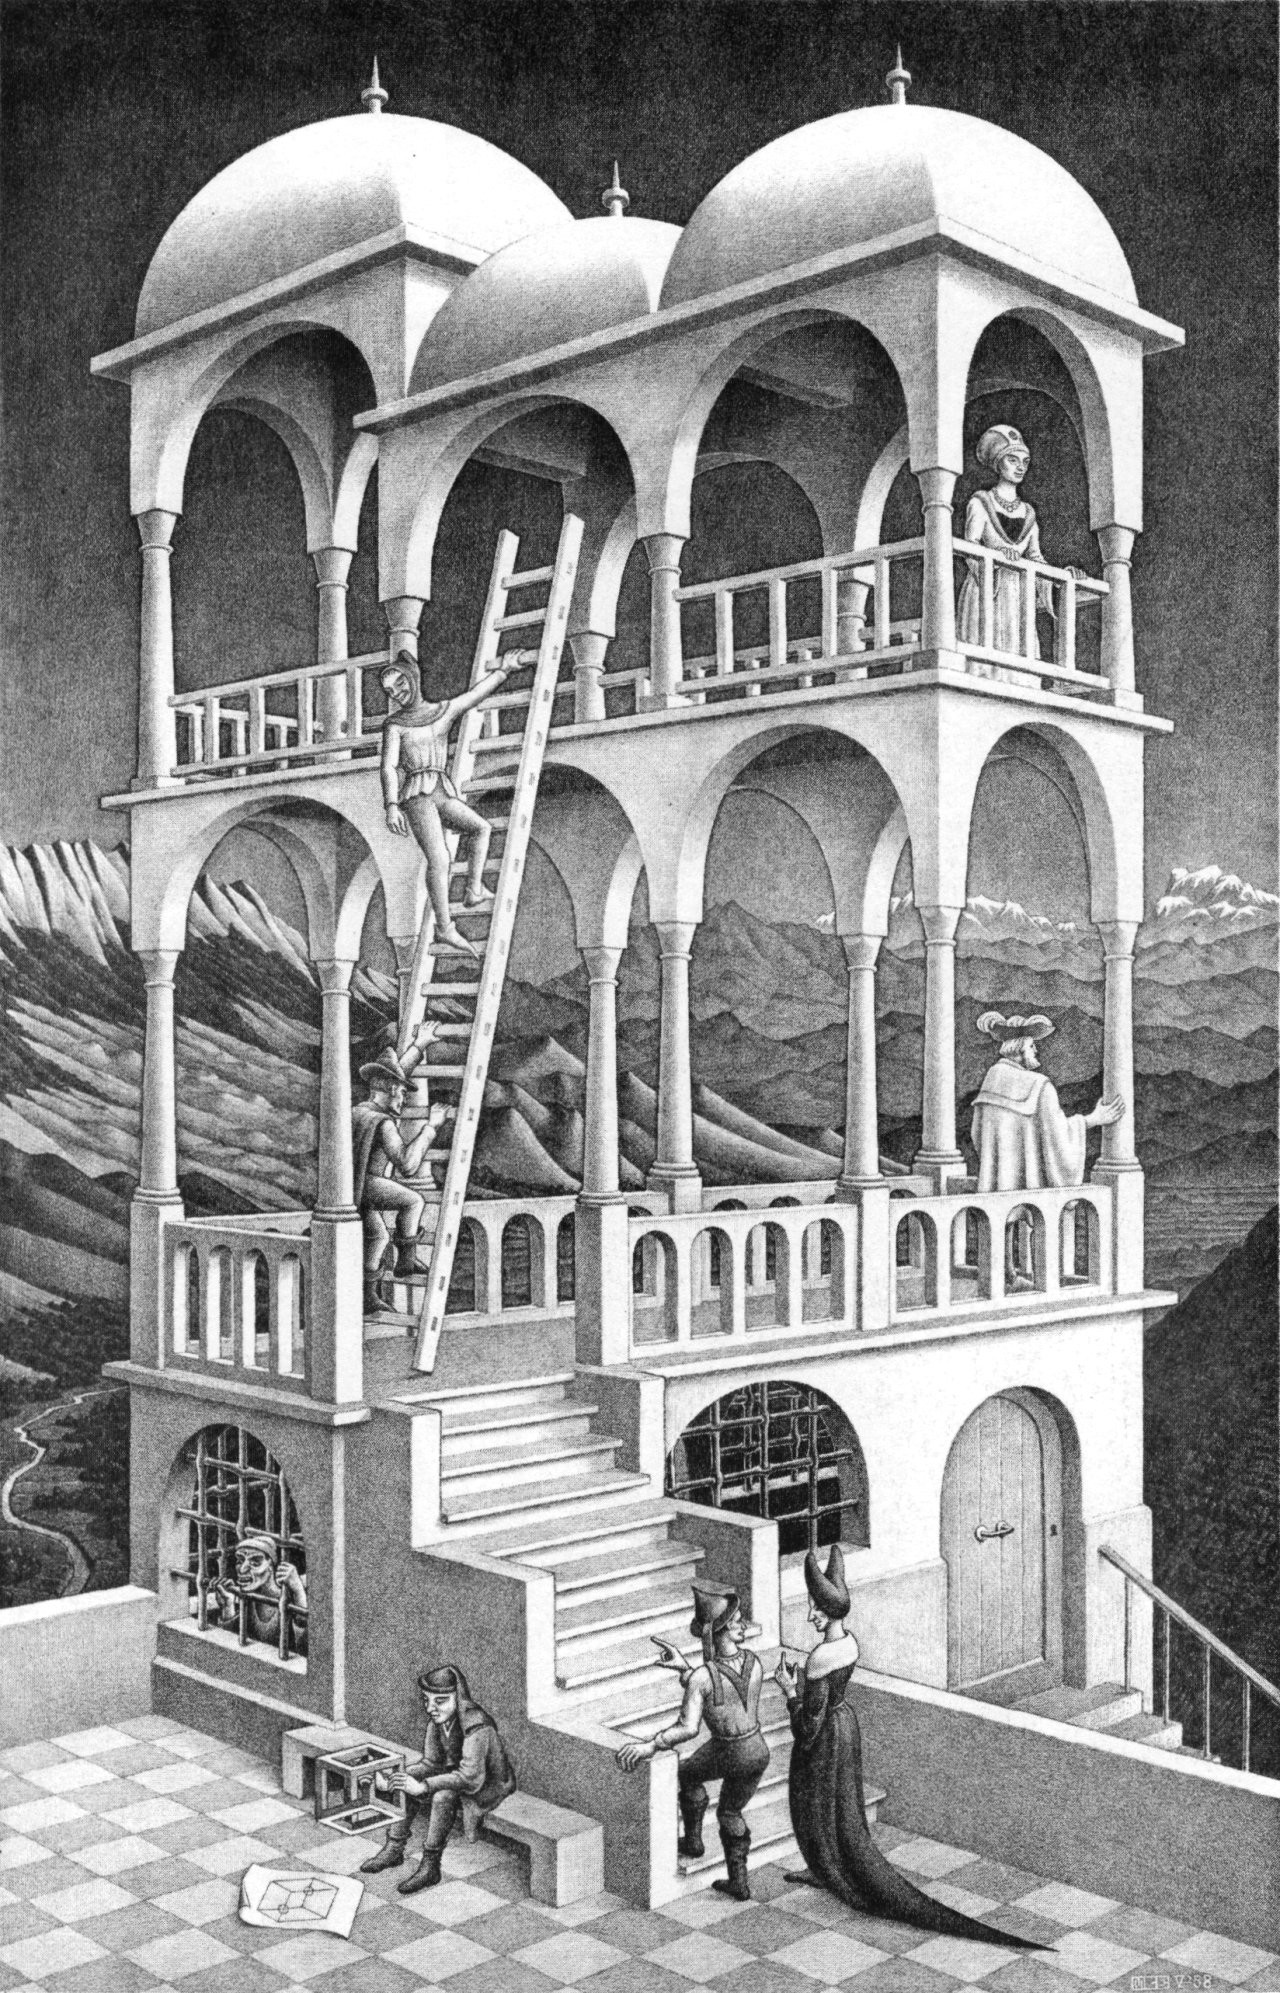 M. C. Escher, People, Artwork, Optical illusion, Monochrome, Portrait display, Lithograph, Building, Stairs, Ladders, Cube, Mountains, Arch Wallpaper